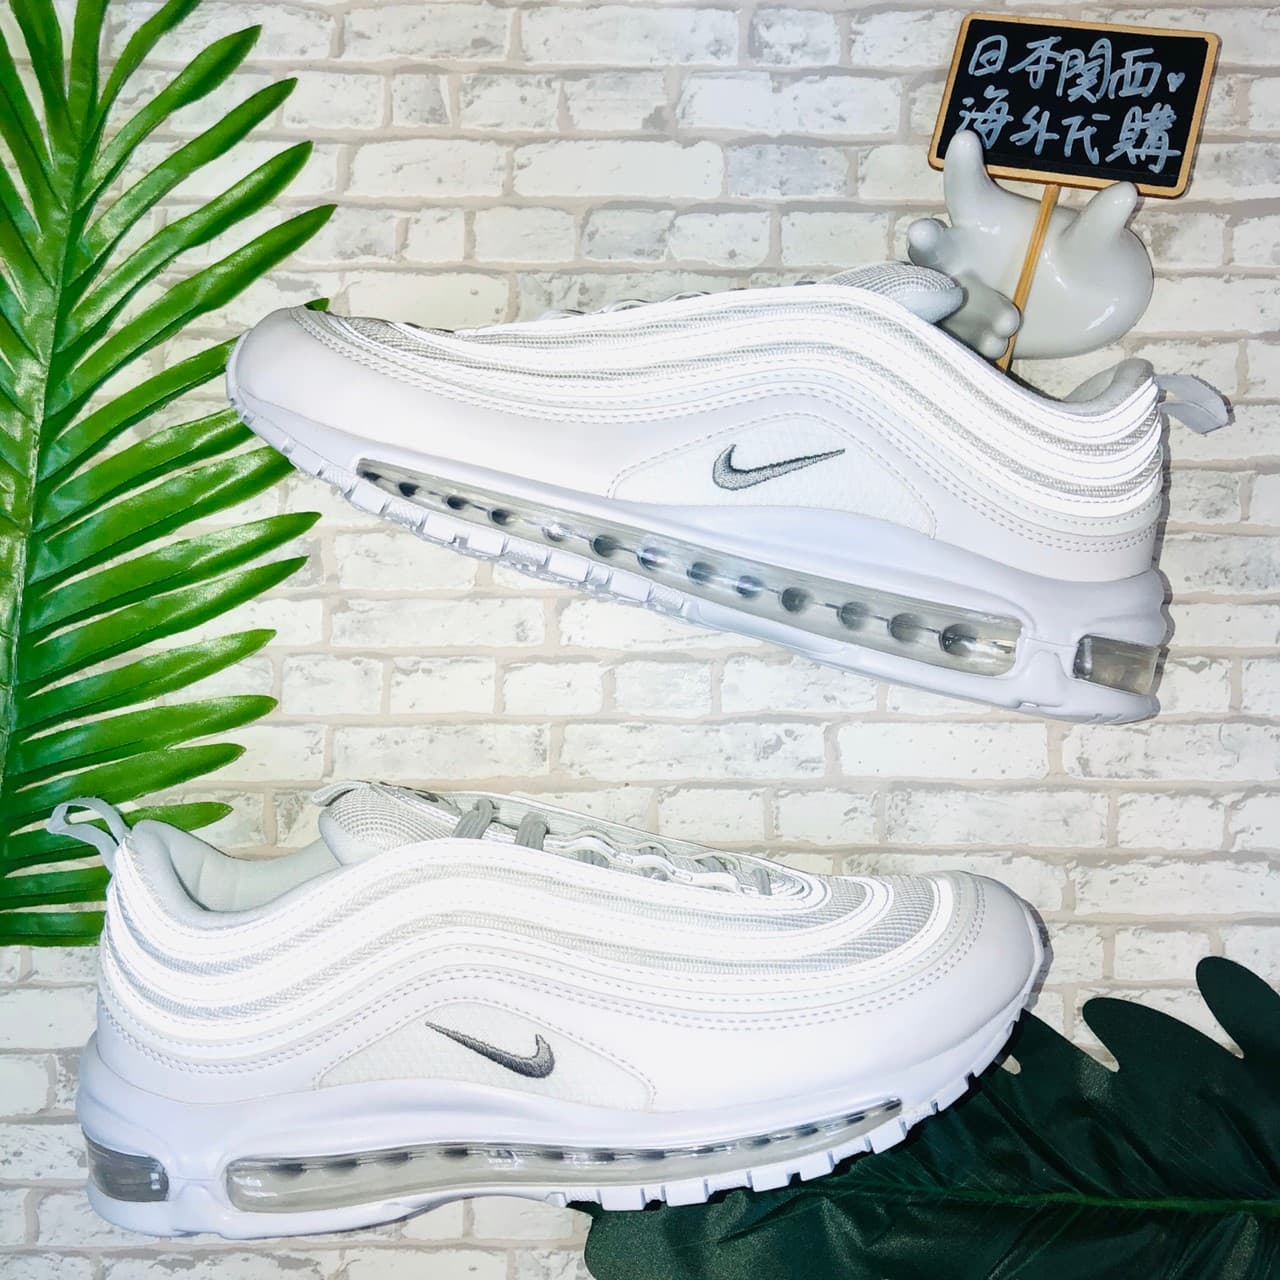 Here's the Nike Air Max 97 Neon nss magazine